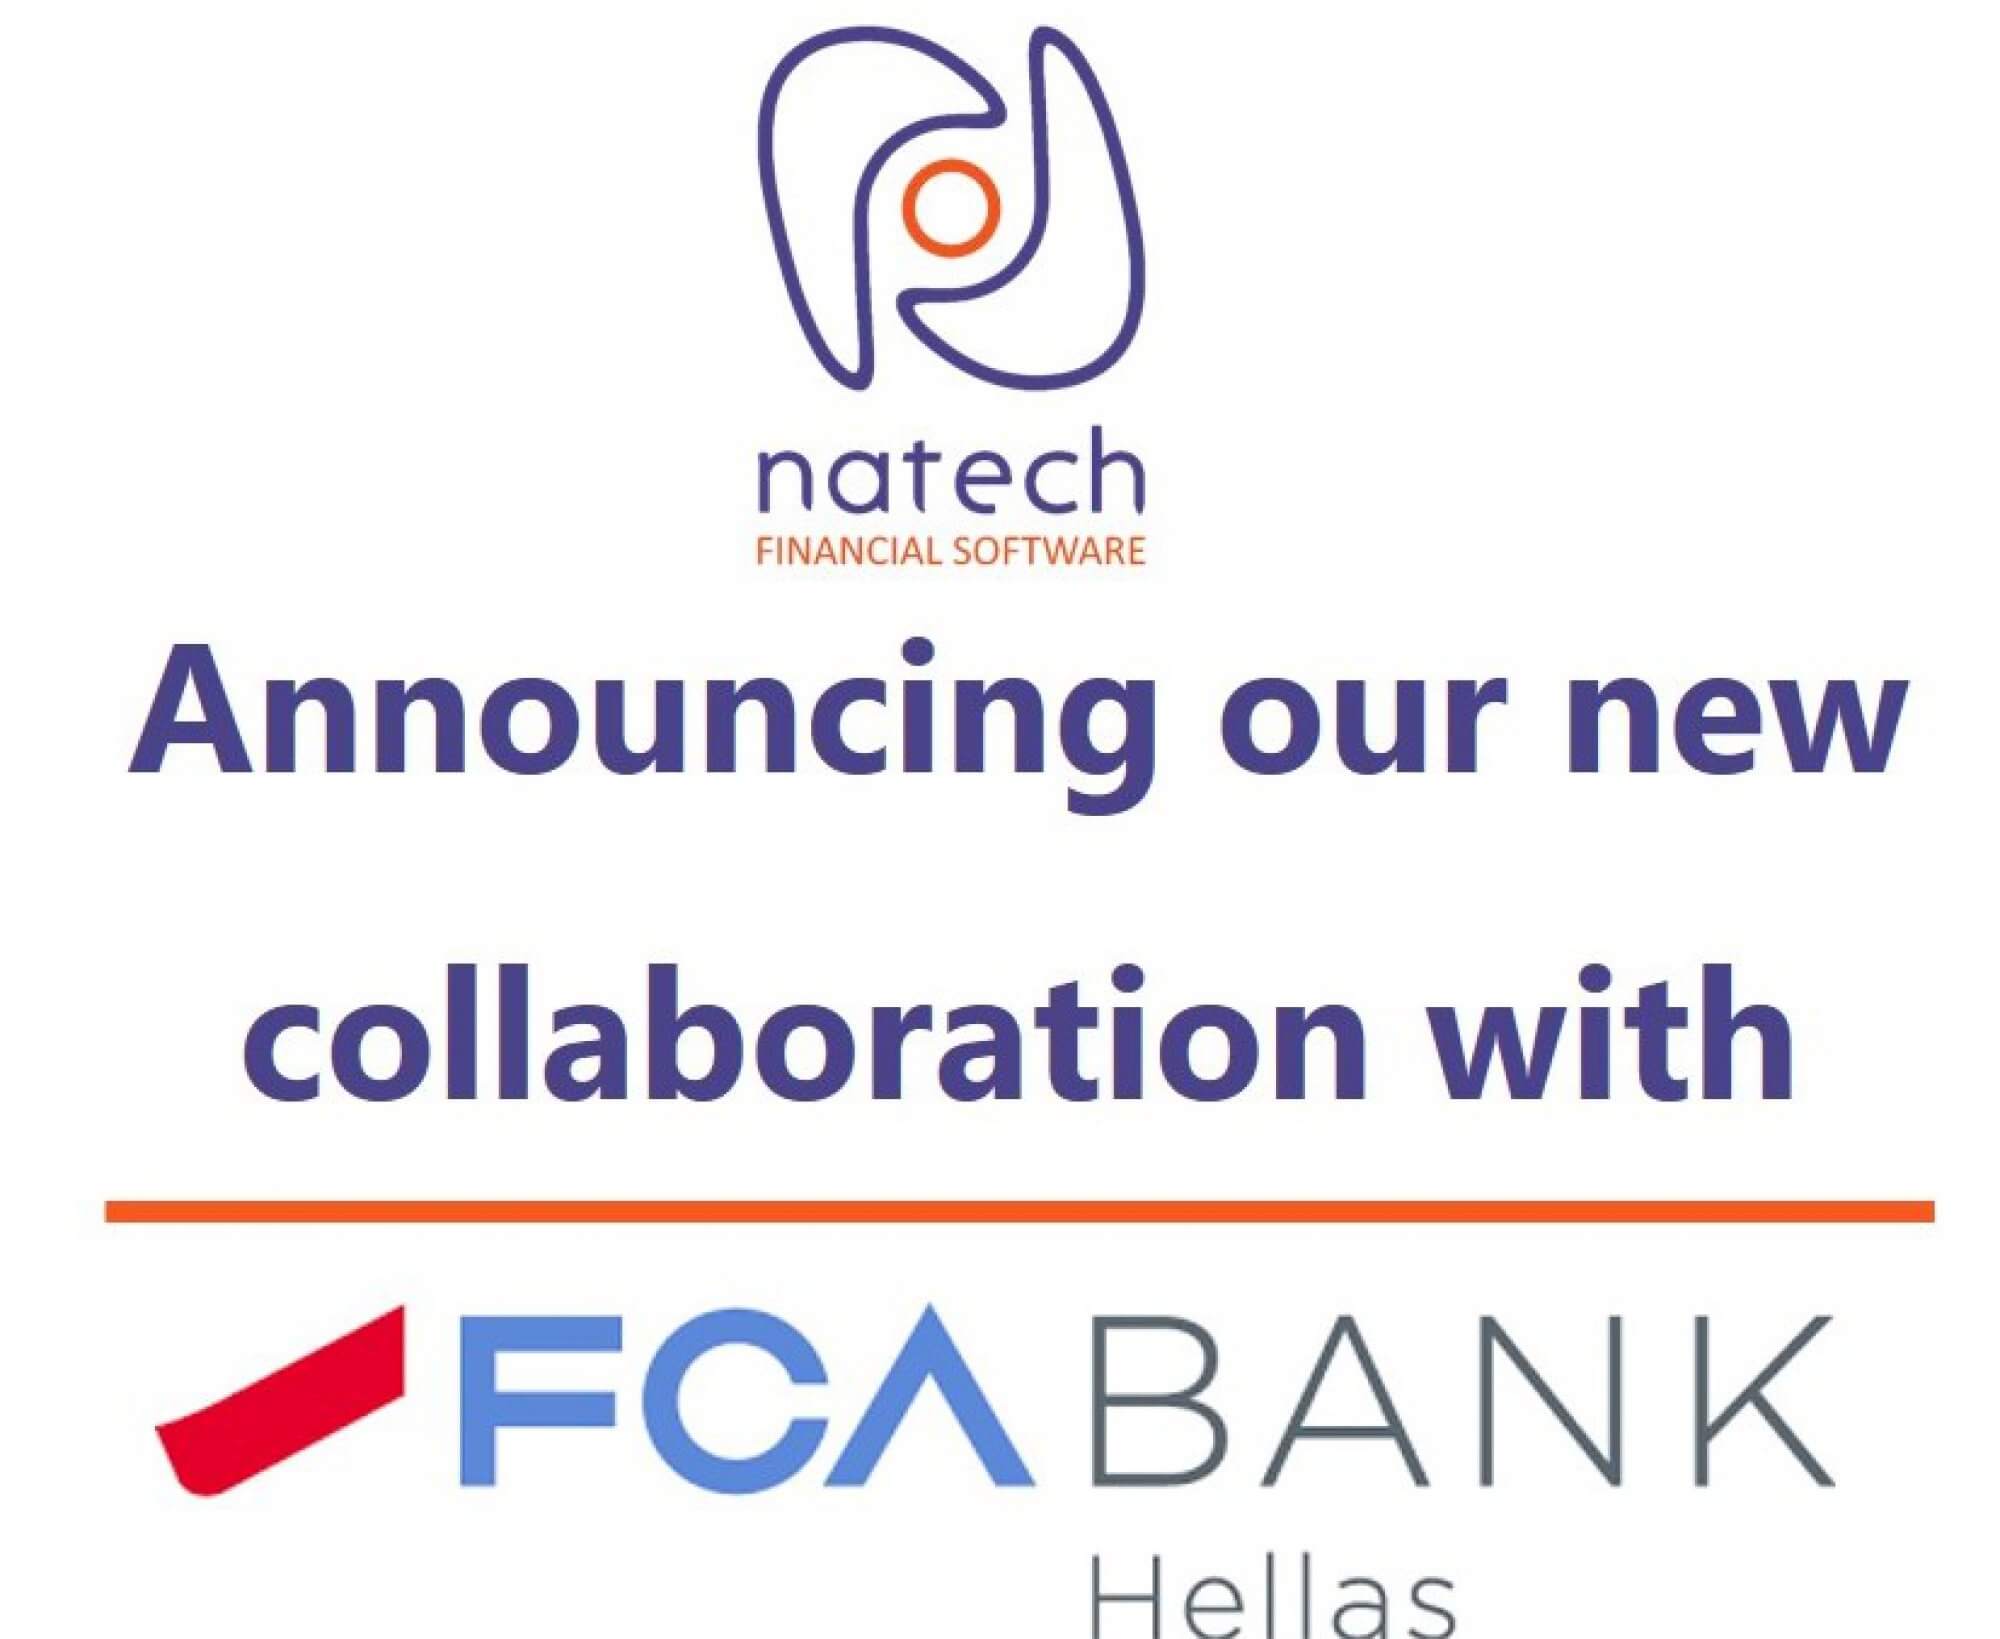 Natech news: New collaboration with FCA BANK